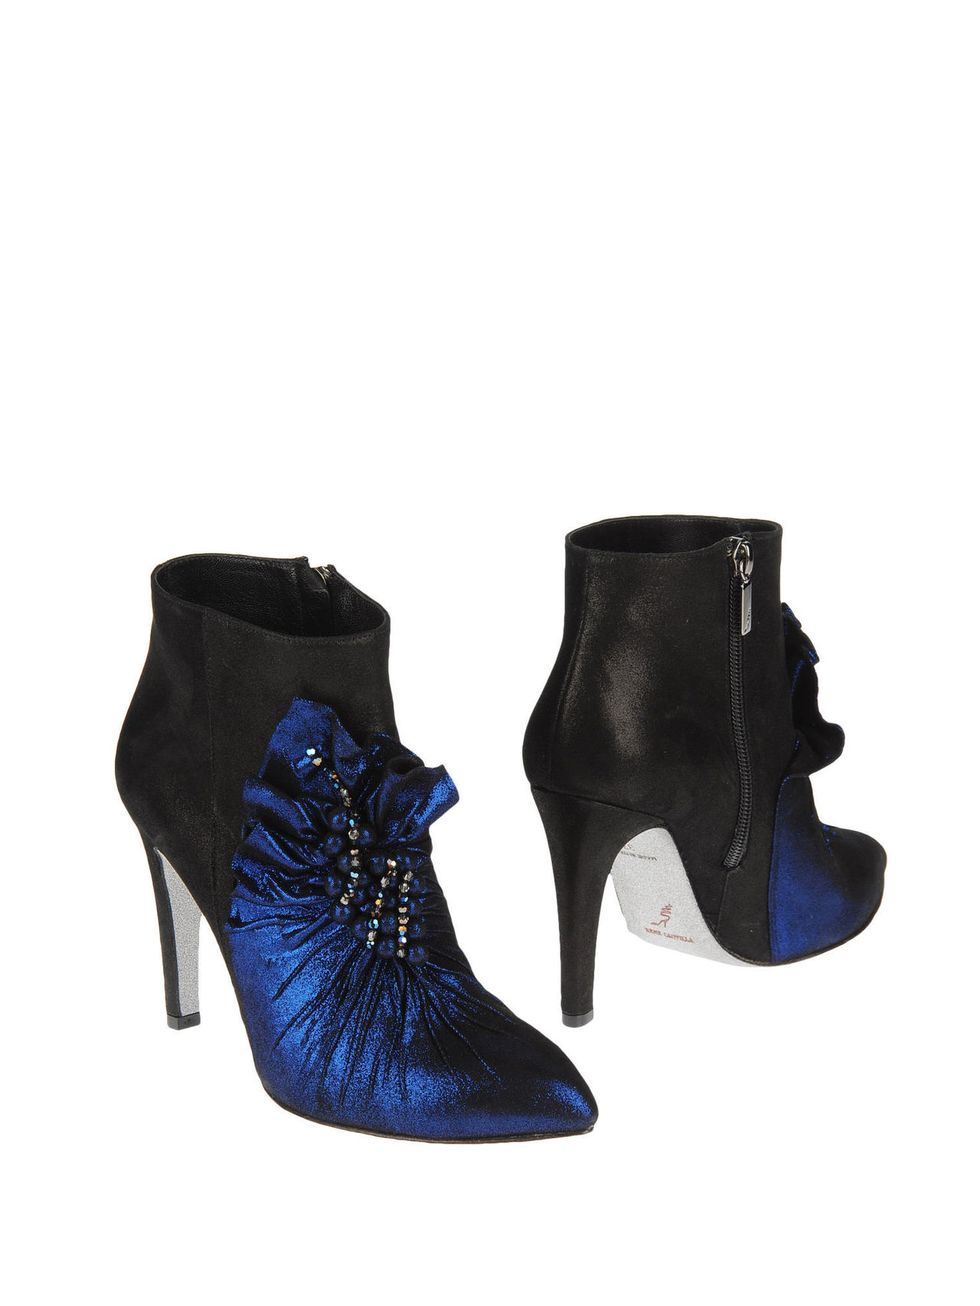 Footwear, Fashion, Boot, Electric blue, Leather, Foot, Fashion design, Synthetic rubber, Buckle, High heels, 